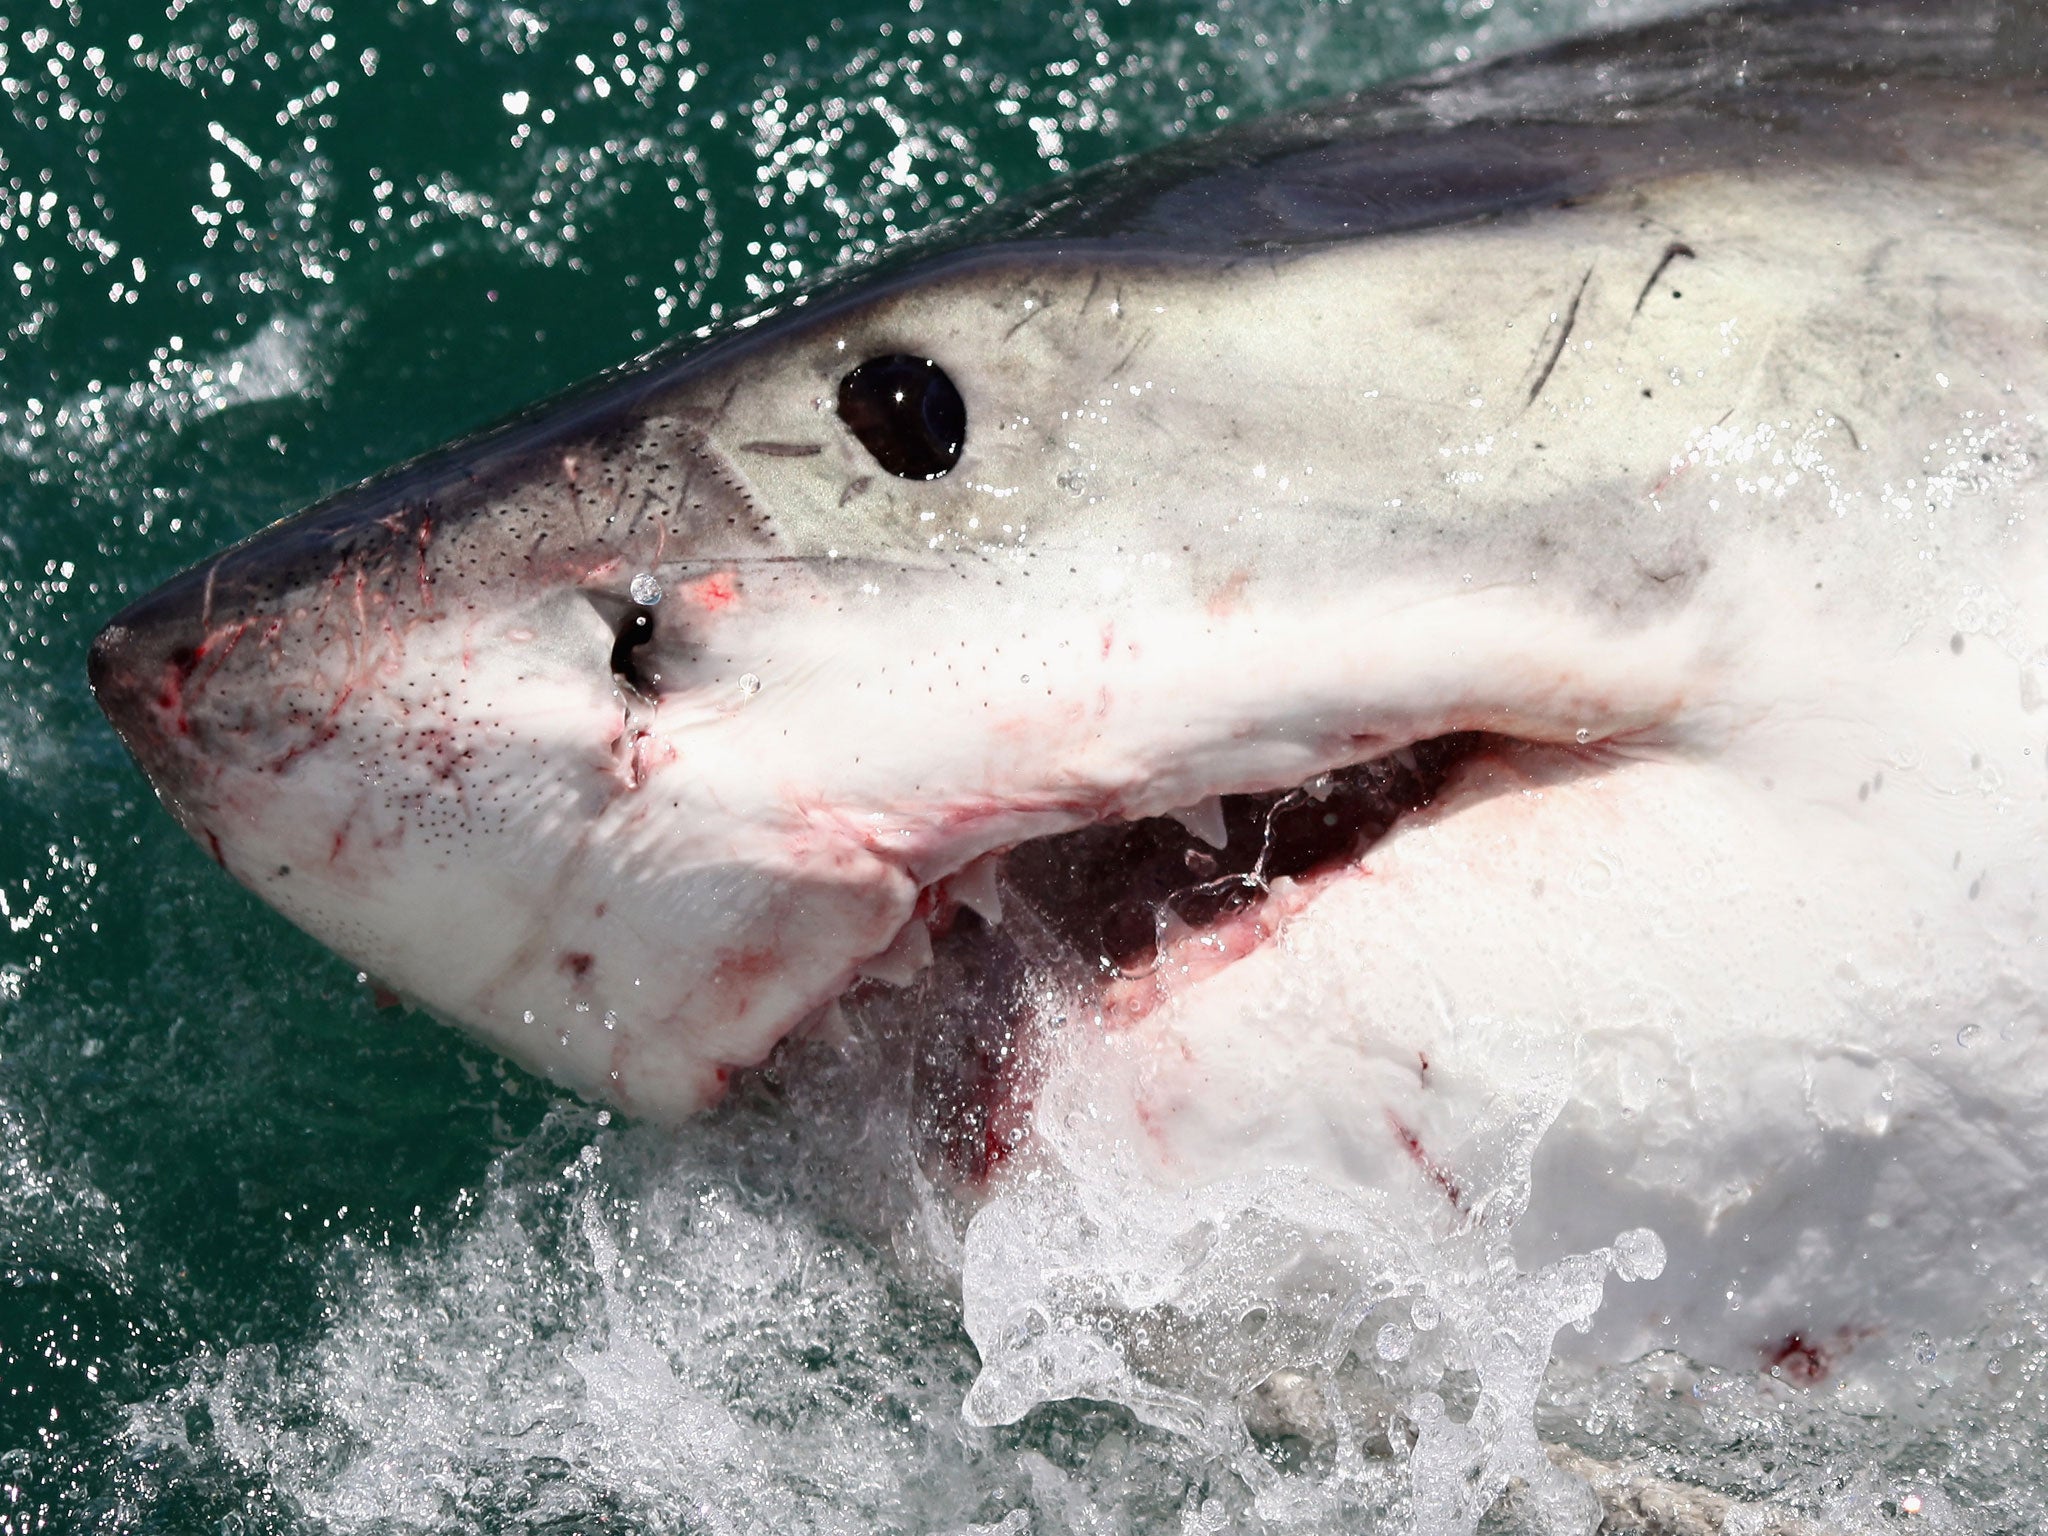 A team of Australian researchers are attempting to hunt down the mystery ‘sea monster’ that “savagely devoured” a nine ft Great White Shark in front of filmmaker David Riggs 11 years ago.